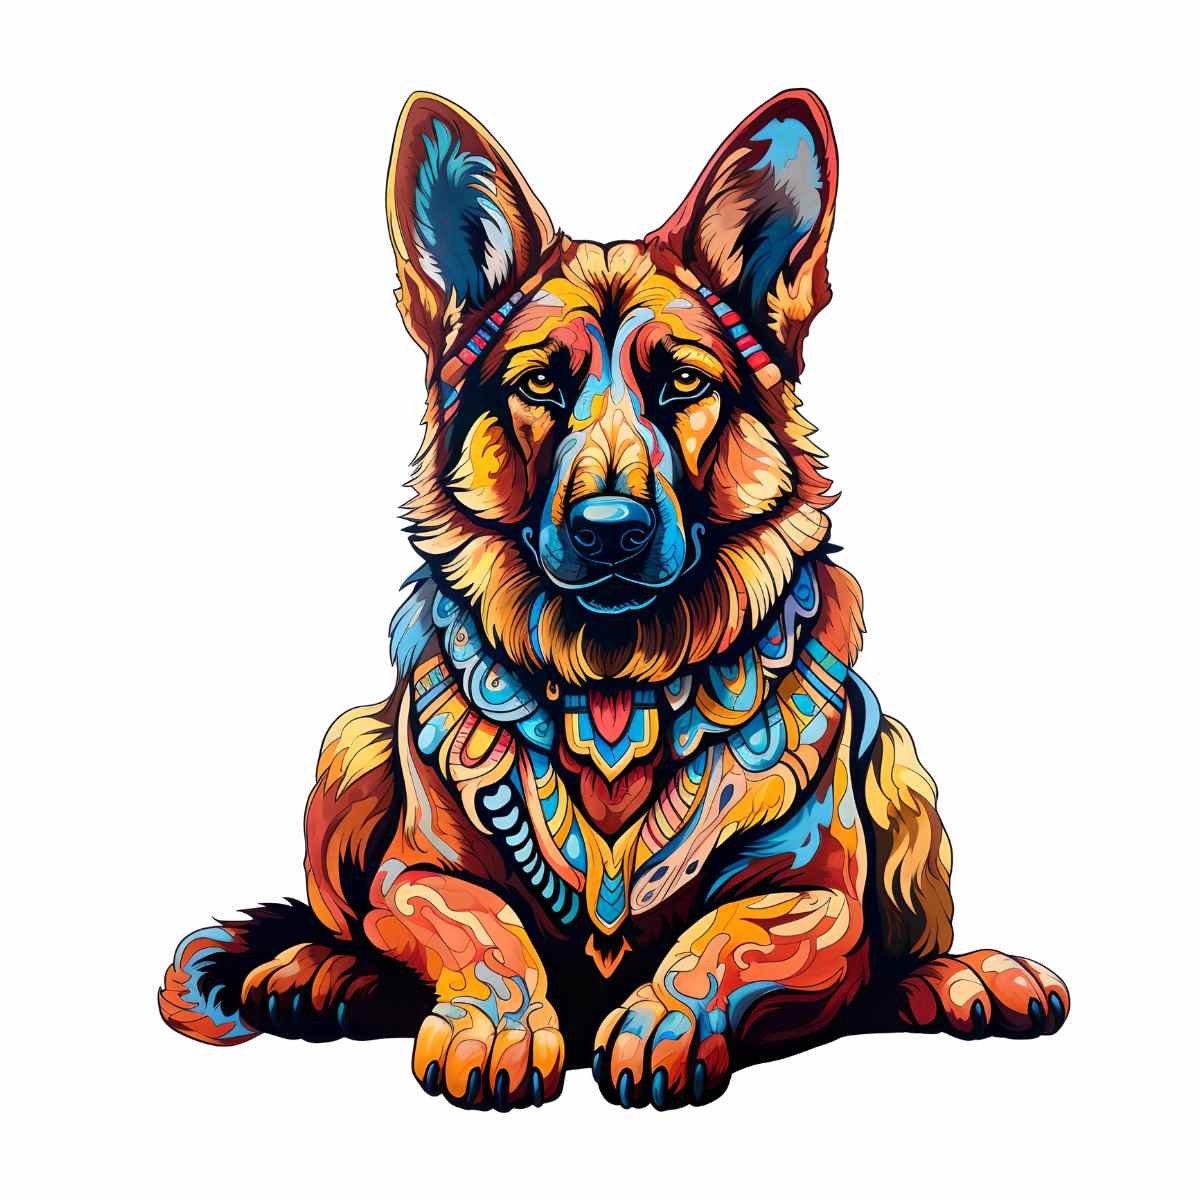 Animal Jigsaw Puzzle > Wooden Jigsaw Puzzle > Jigsaw Puzzle A5 German Shepherd Dog - Jigsaw Puzzle